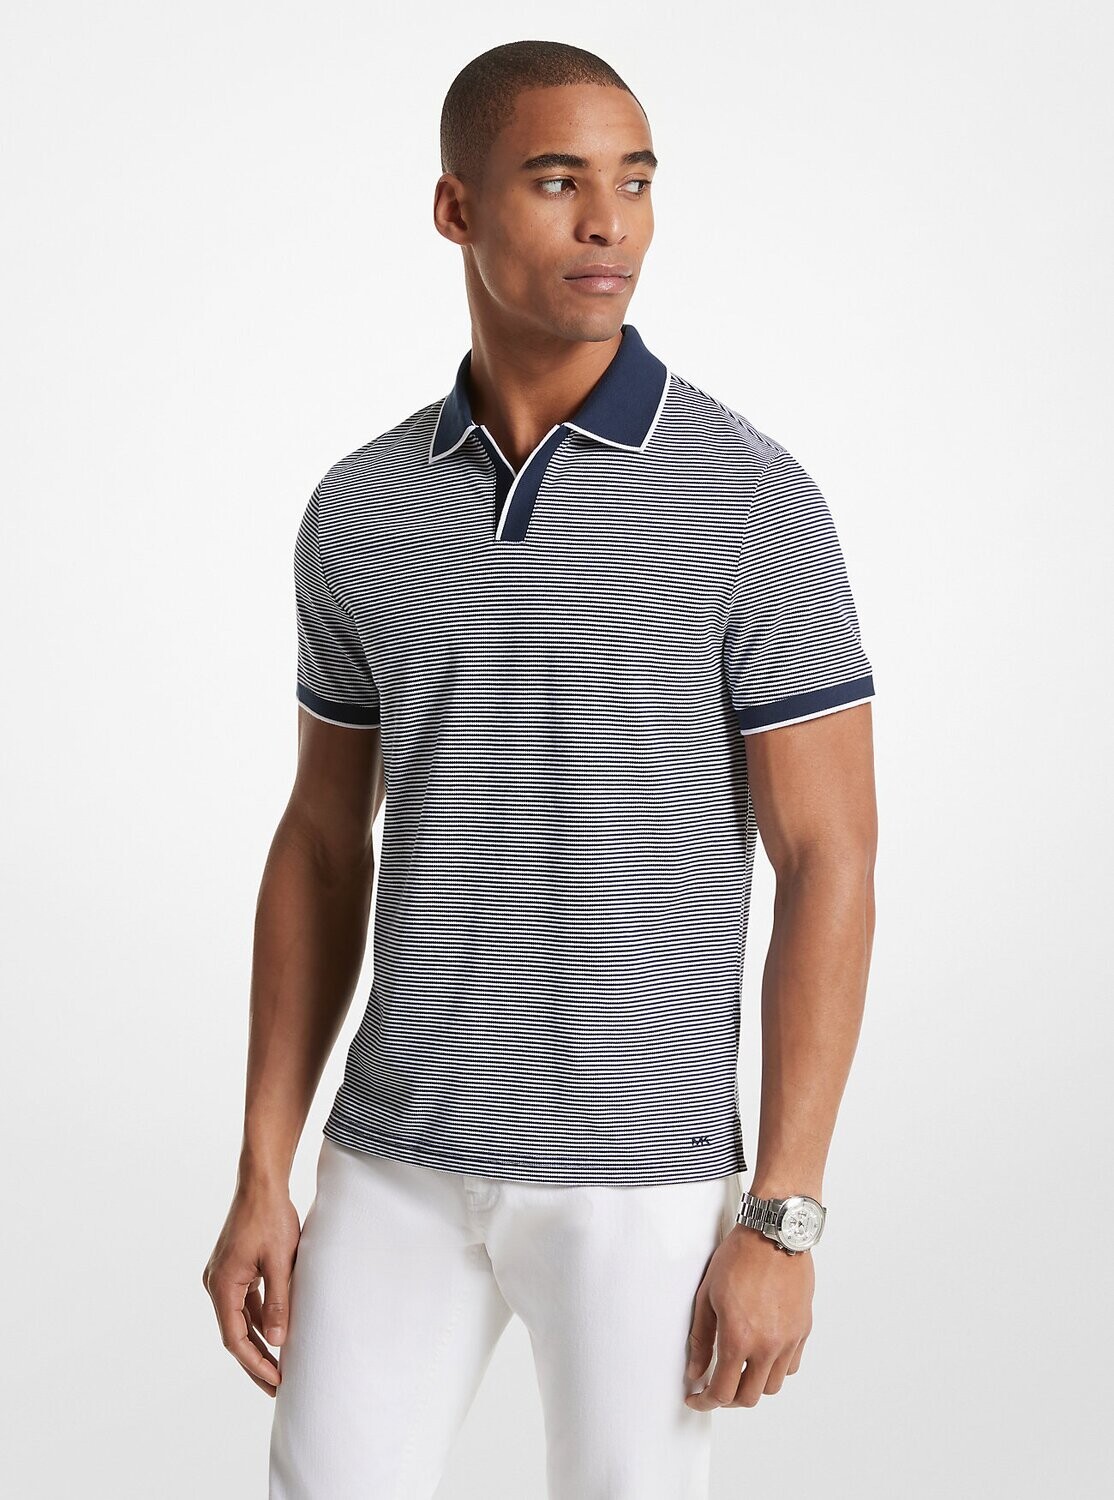 Michael Kors CR451YODH9 Men’s Vacation Textured Polo/, Color: MDNIGHT, Size: S